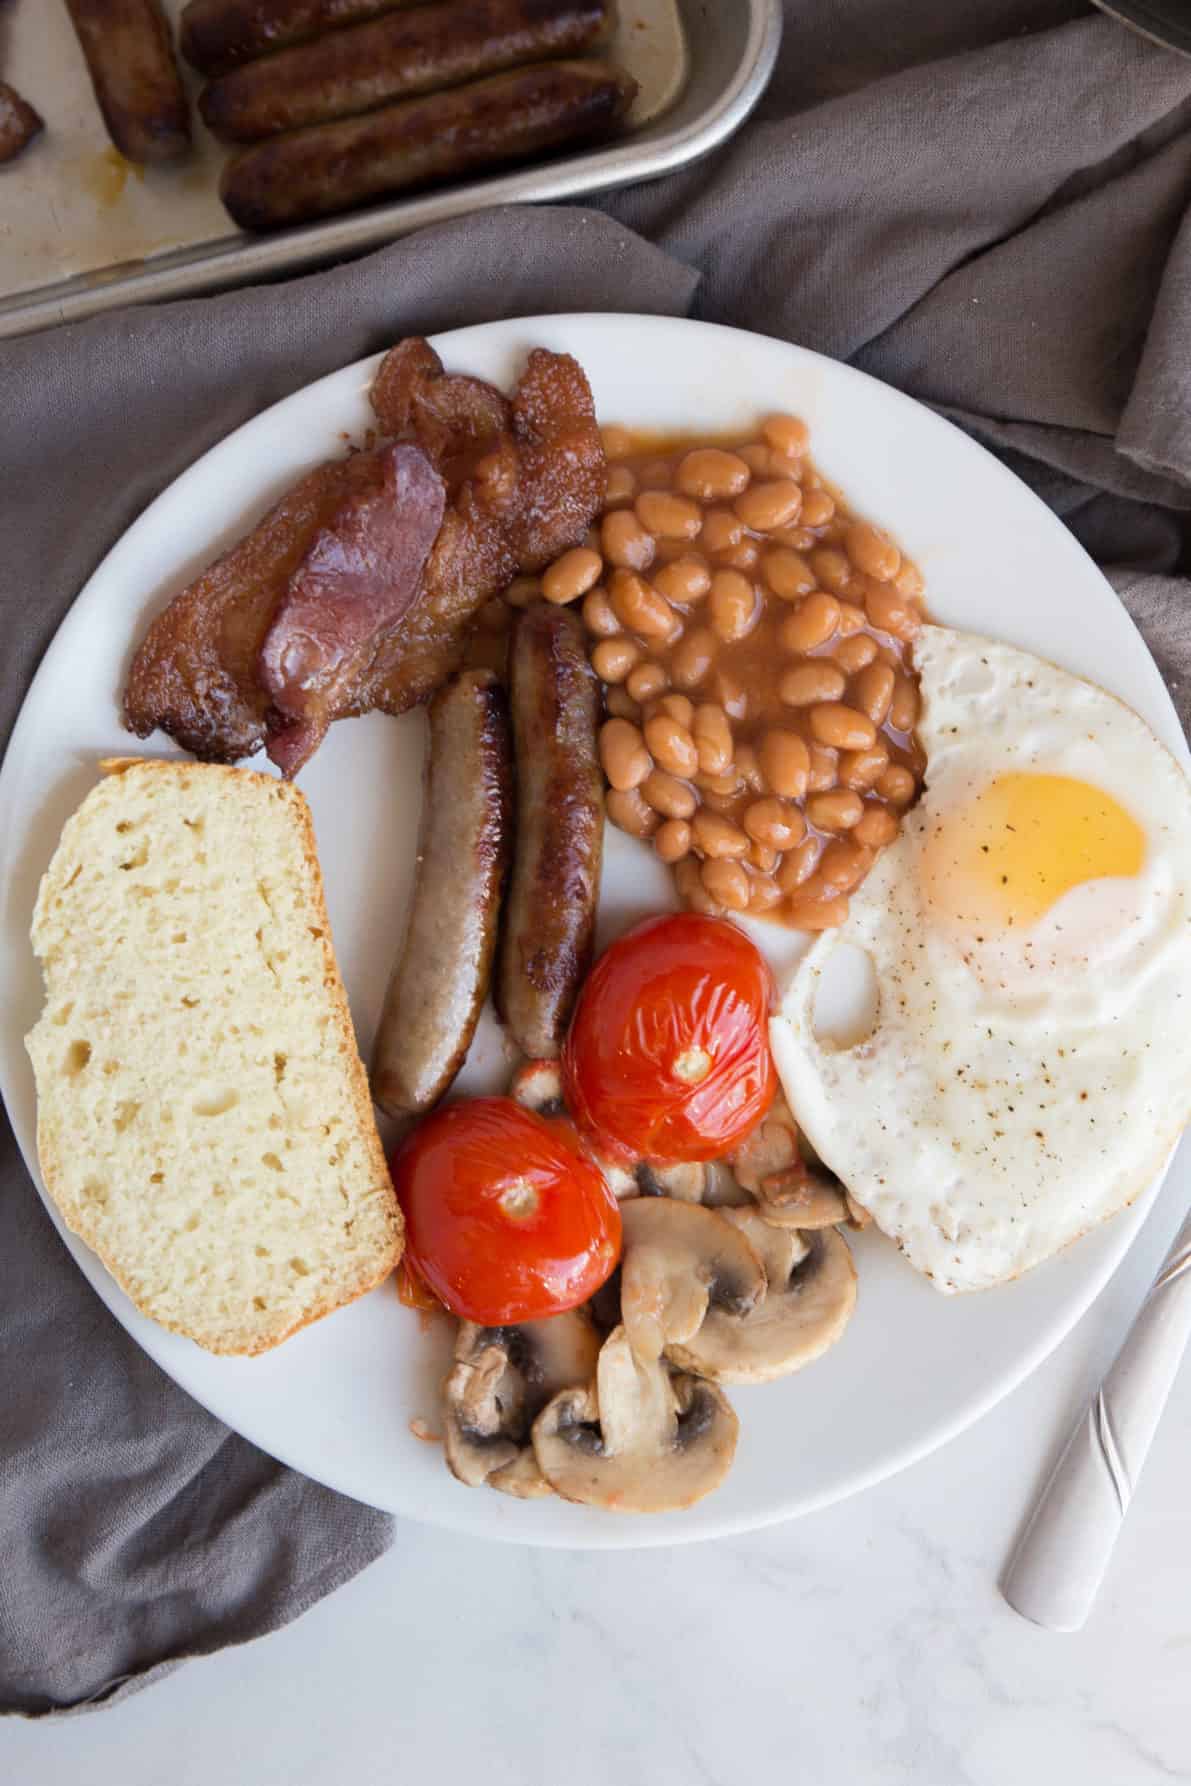 A plate with an Irish Breakfast laid out.